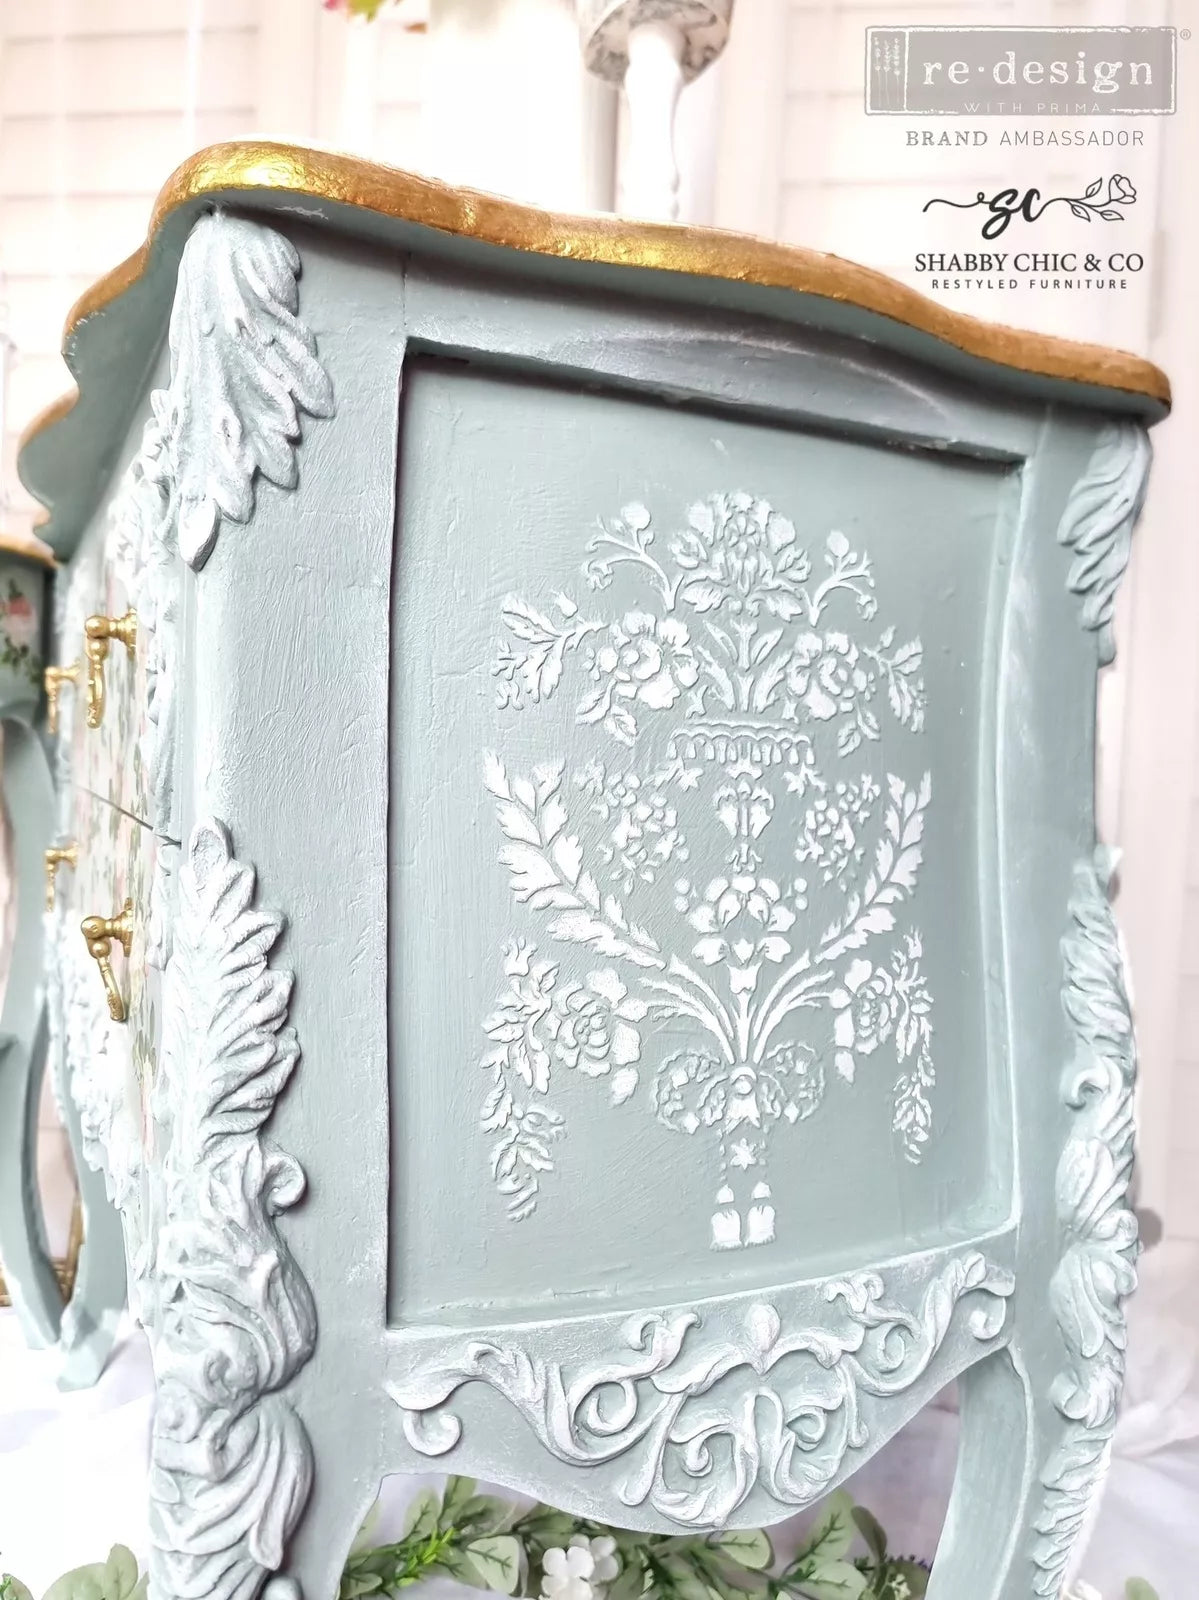 Chapelle Royale (22,9x30,5cm) - Redesign with Prima - Stencil